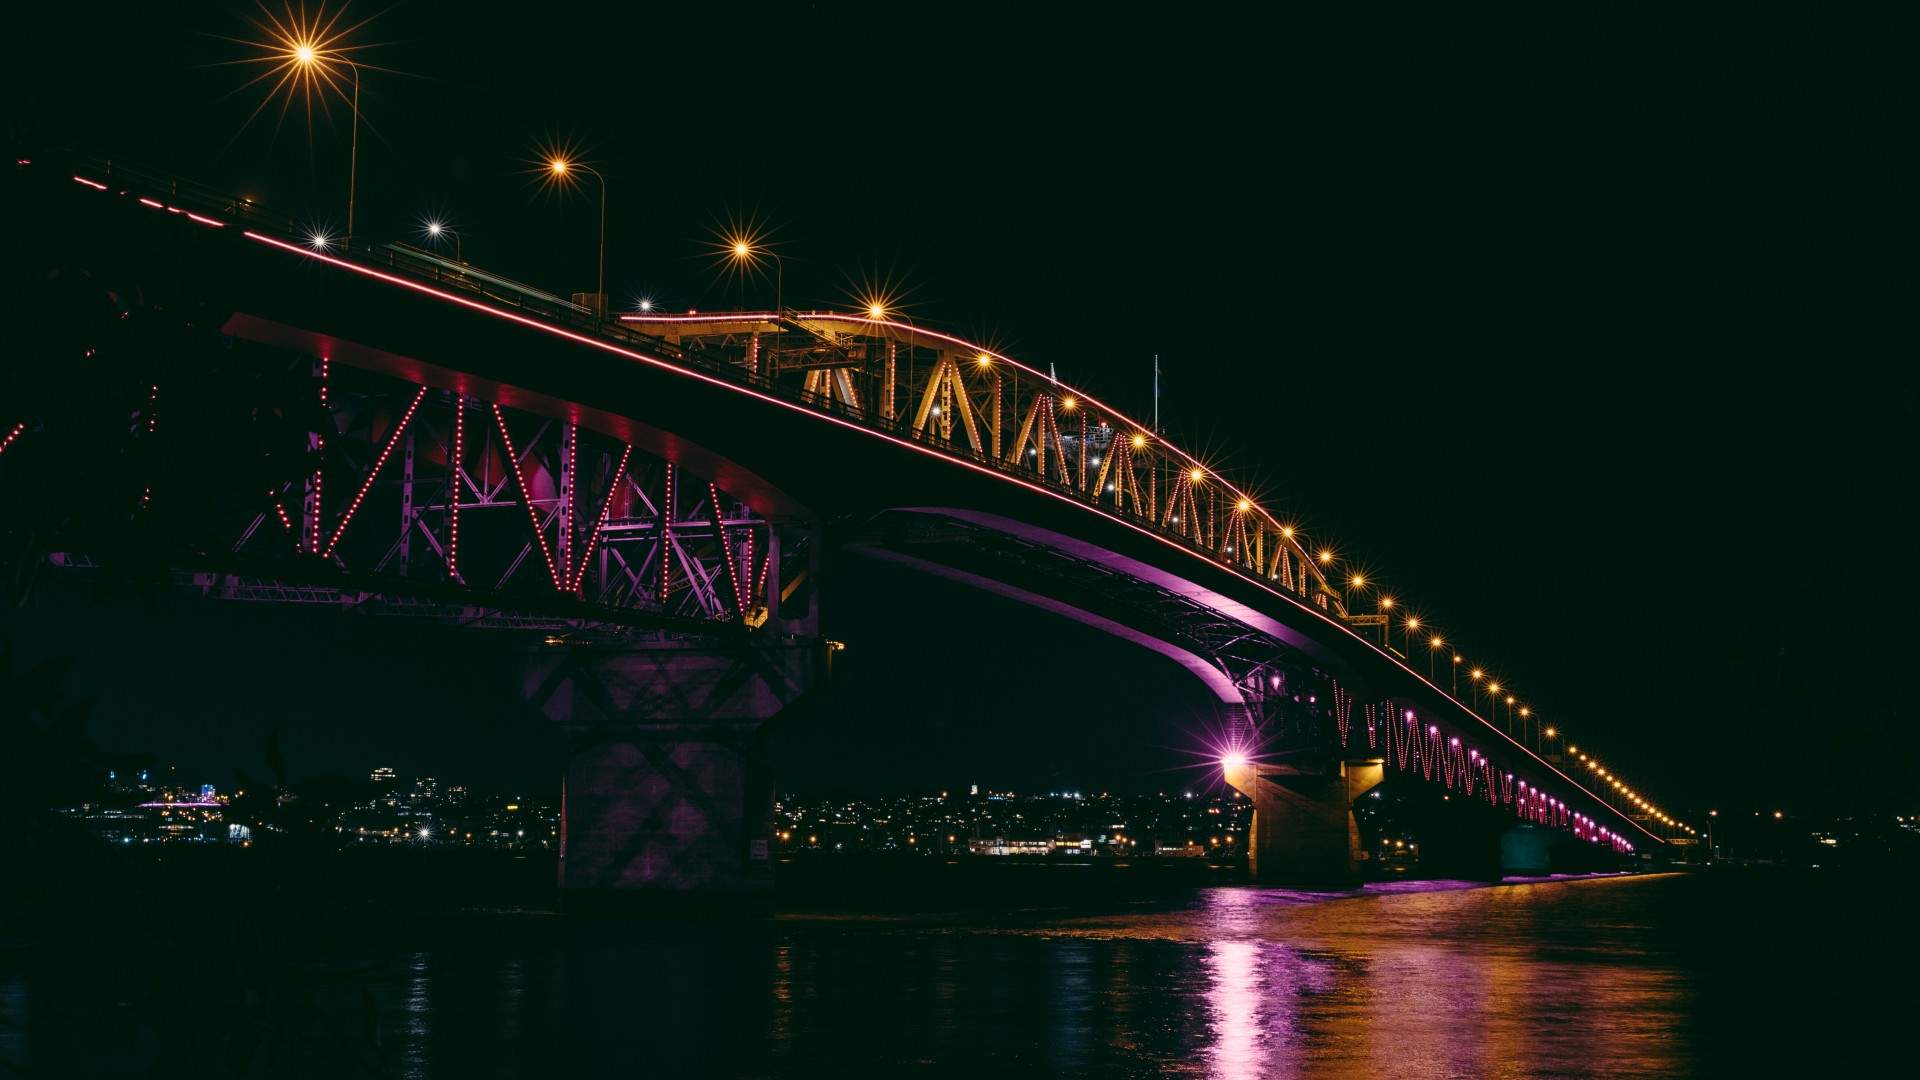 Auckland's Harbour Bridge Will Be Lit Up with Two New Light Shows for the City's Public Holidays